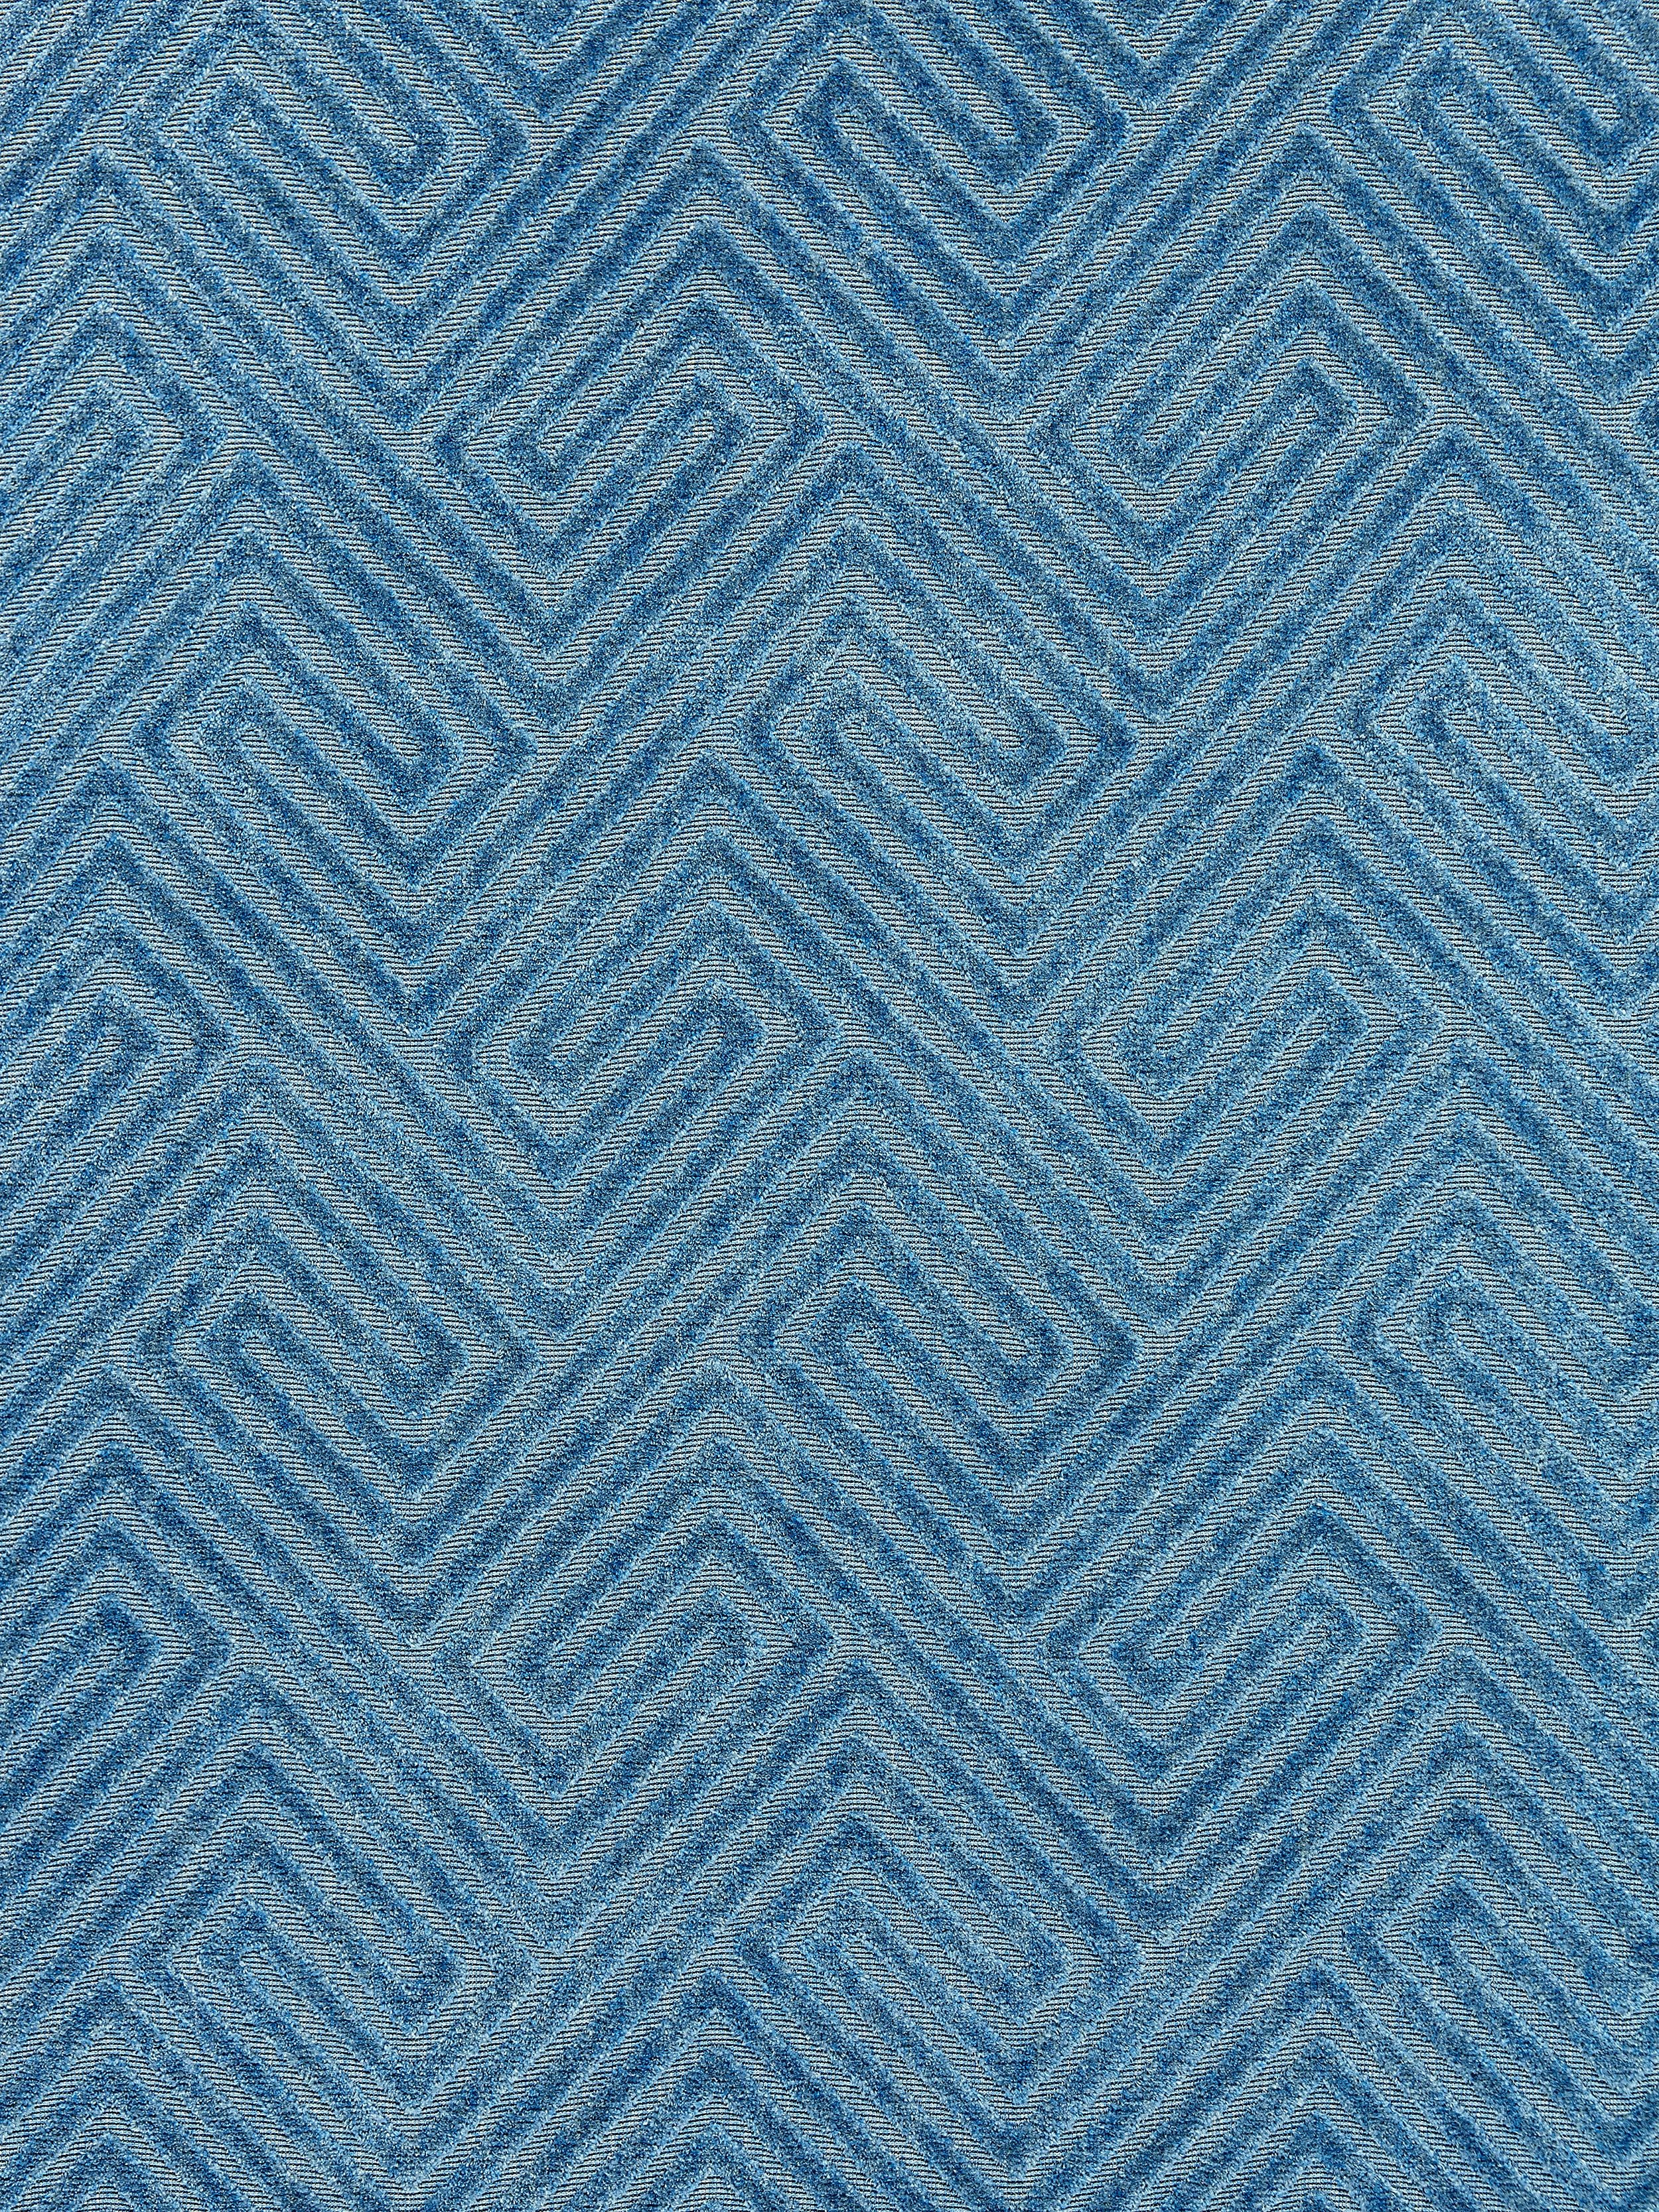 Meander Velvet fabric in denim color - pattern number SC 000127060 - by Scalamandre in the Scalamandre Fabrics Book 1 collection